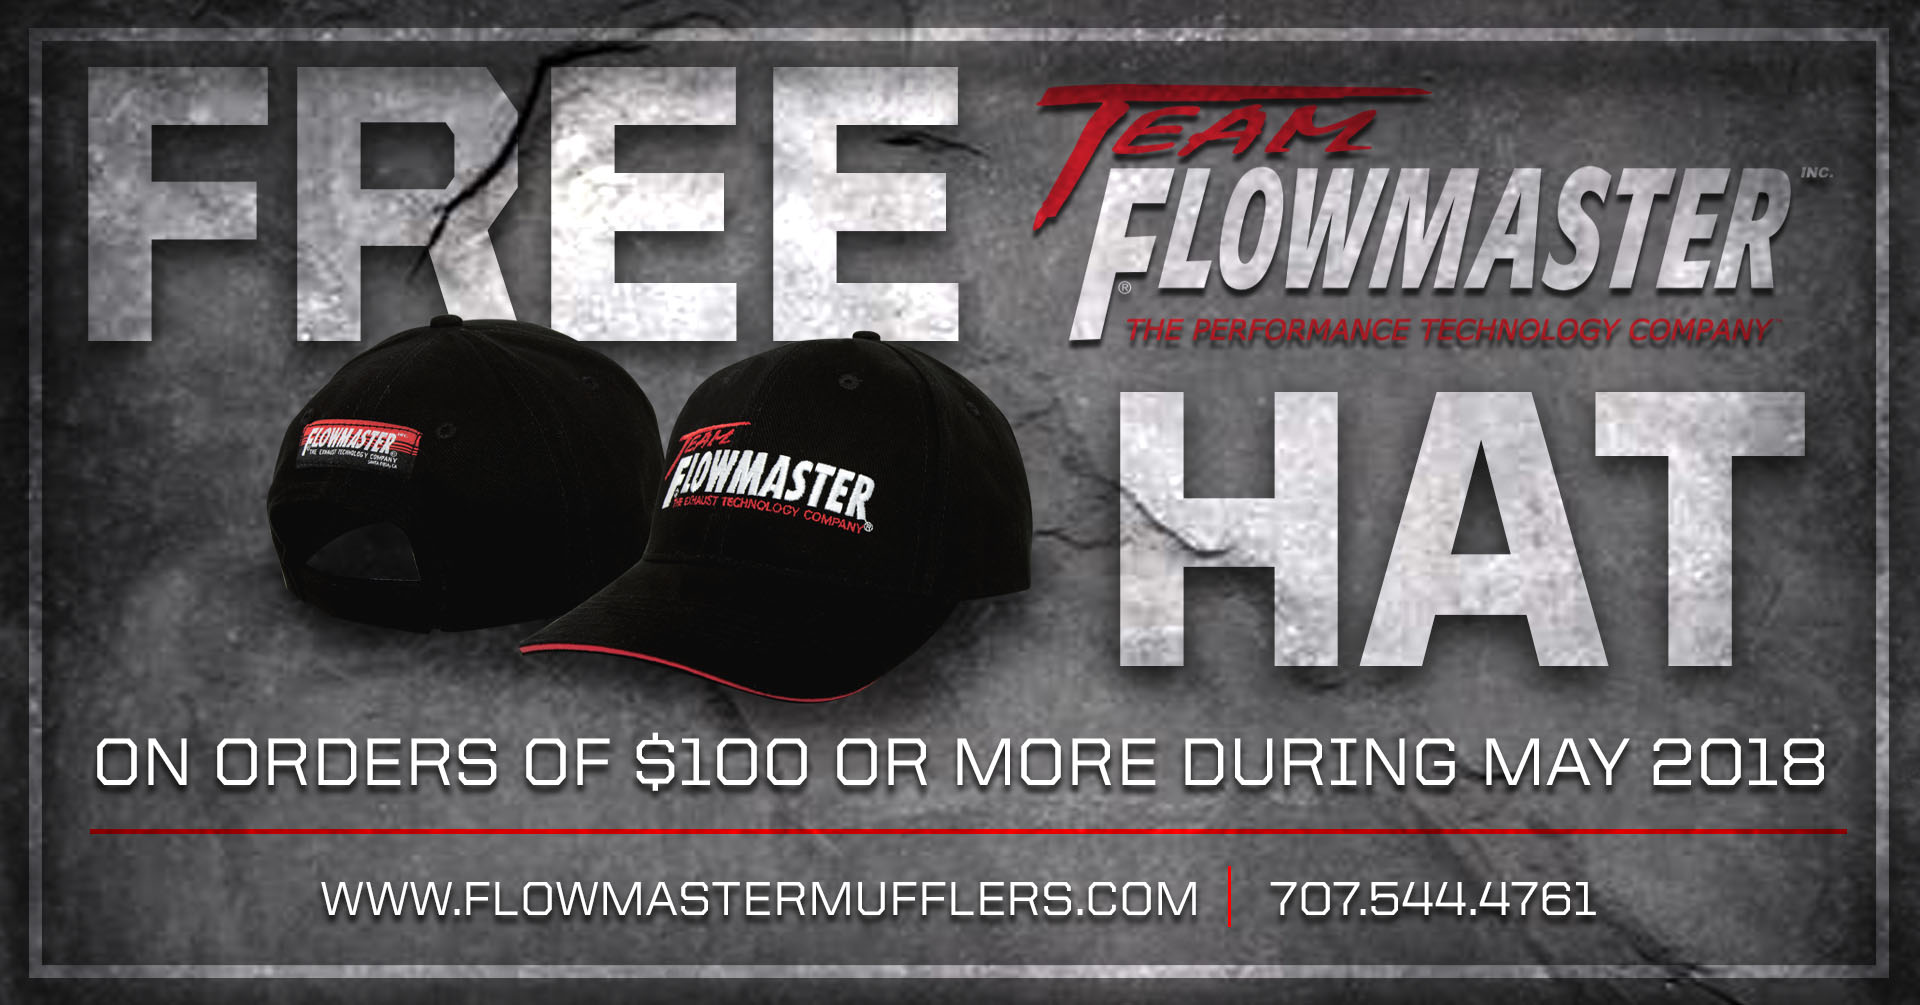 Flowmaster March Instant Rebate Tacoma World